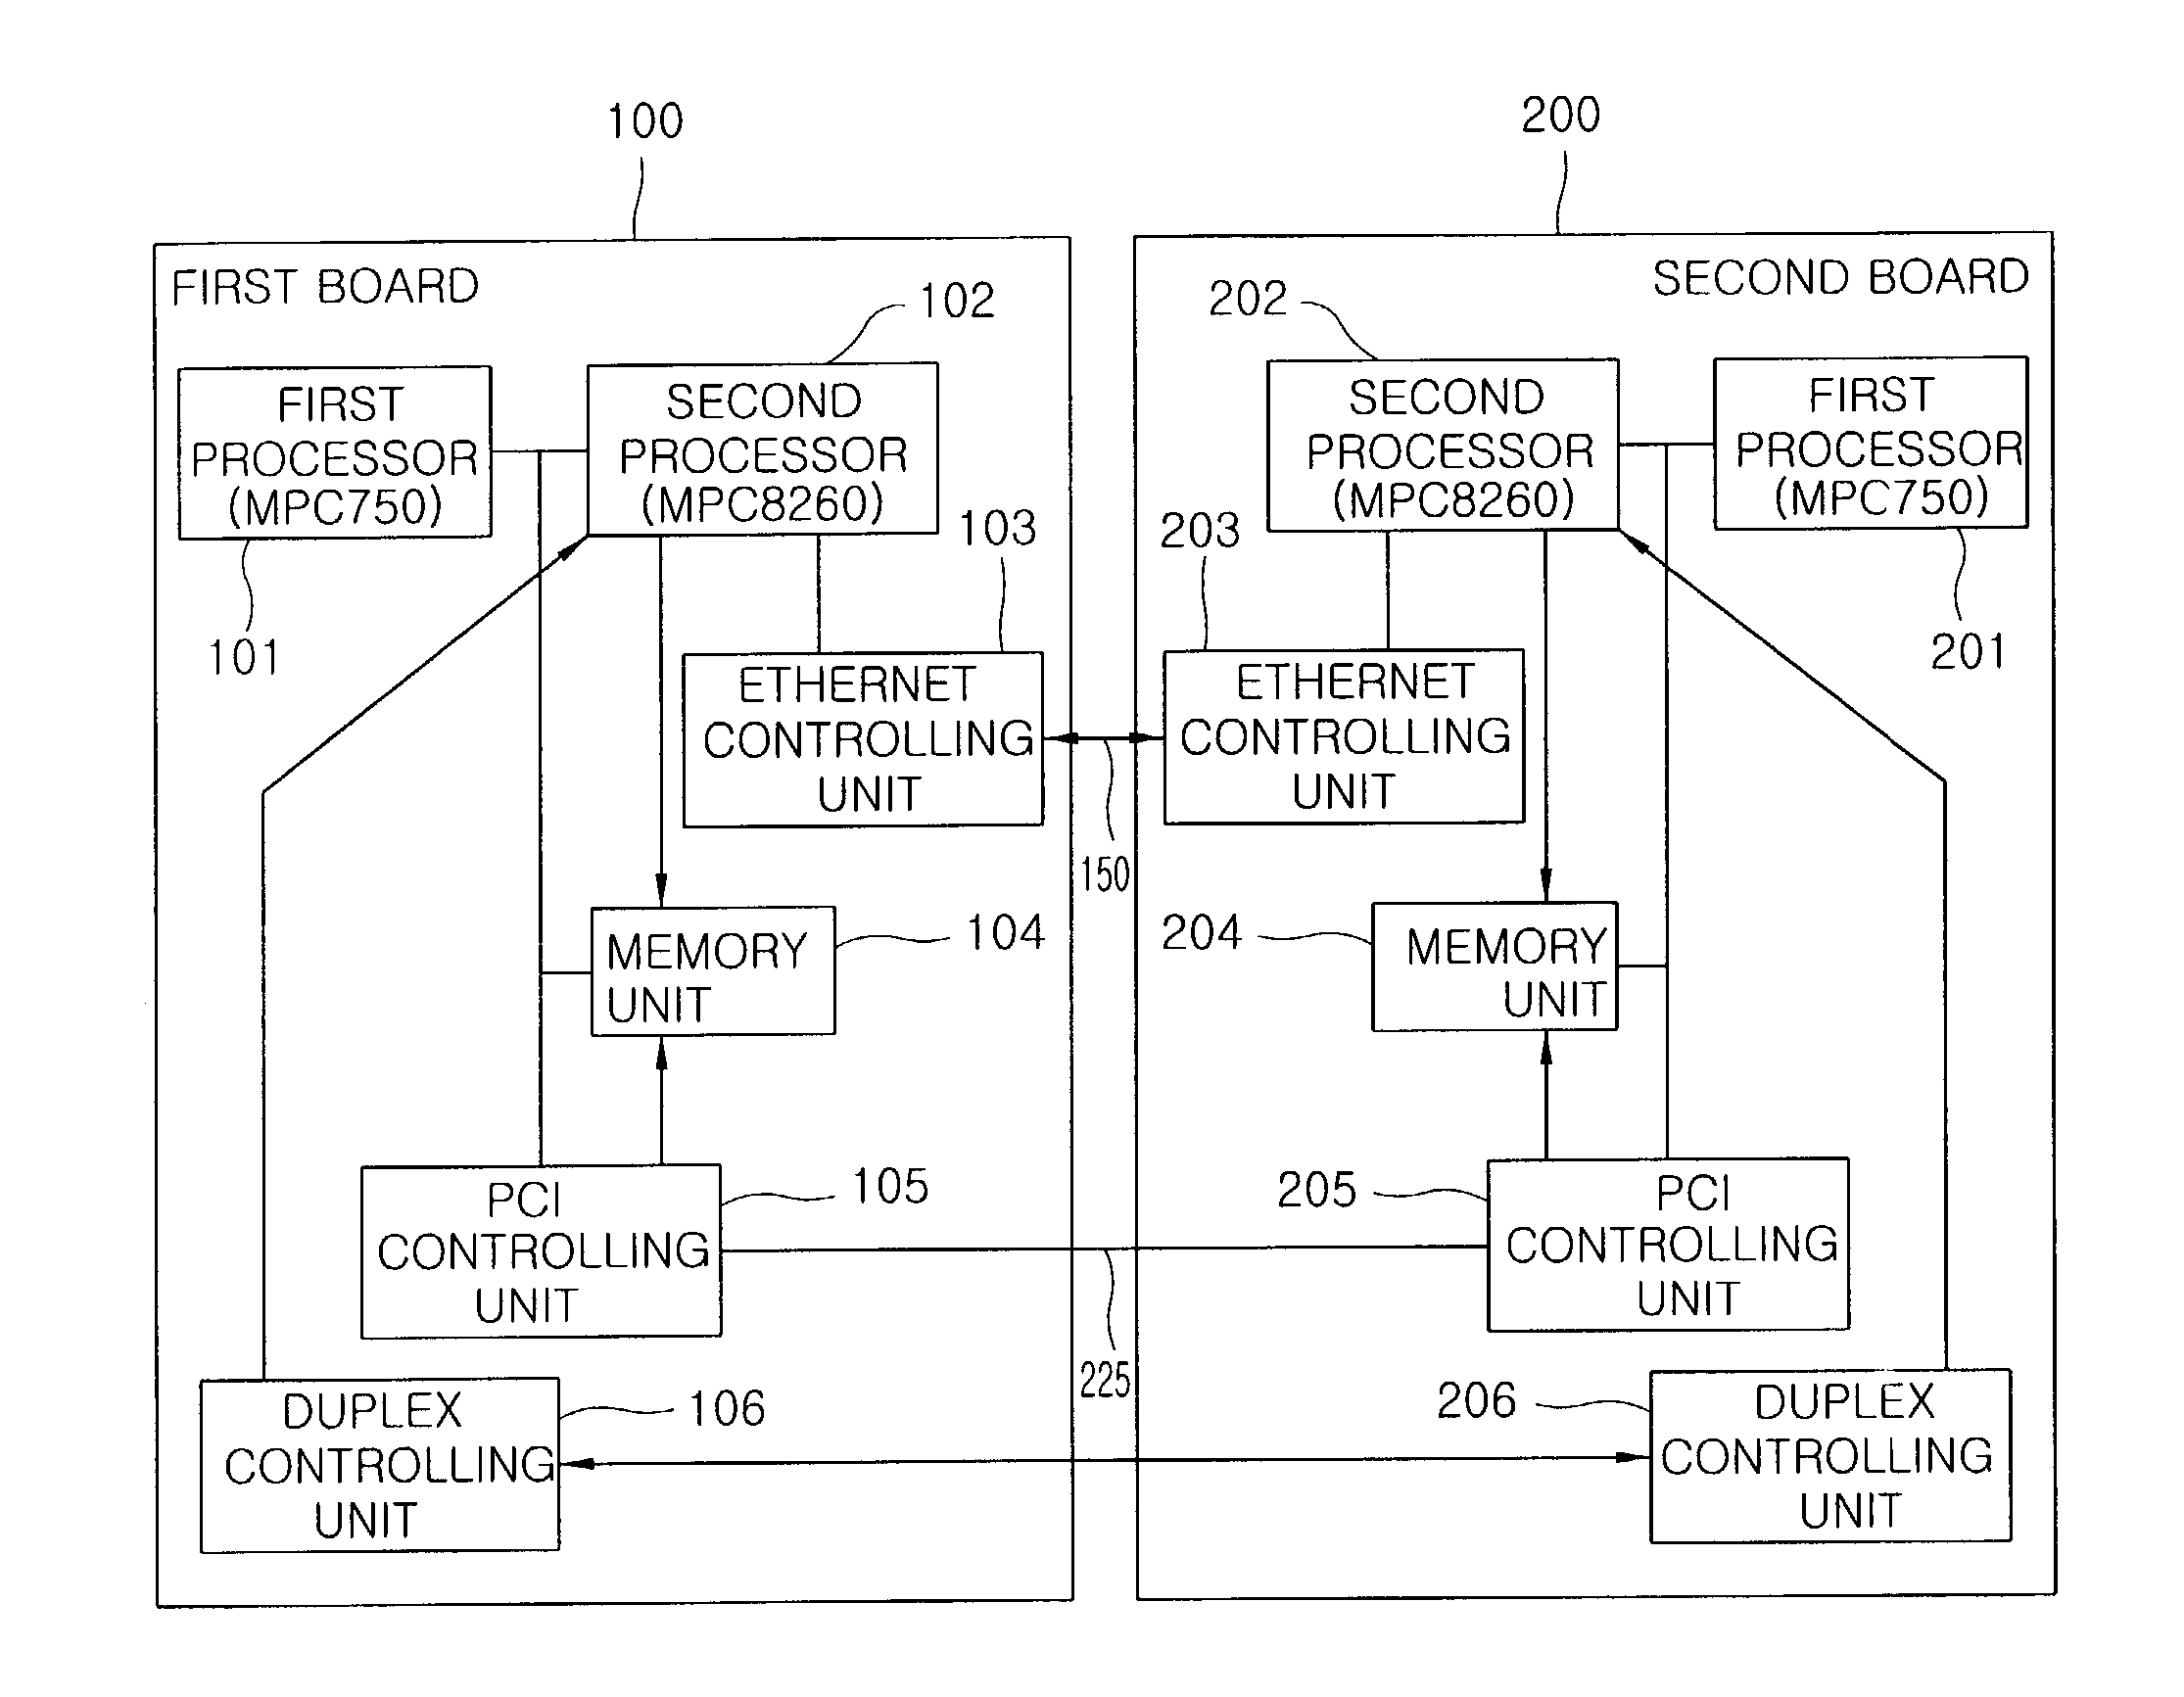 Processor duplexing apparatus based on RTOS in mobile communication system and method thereof